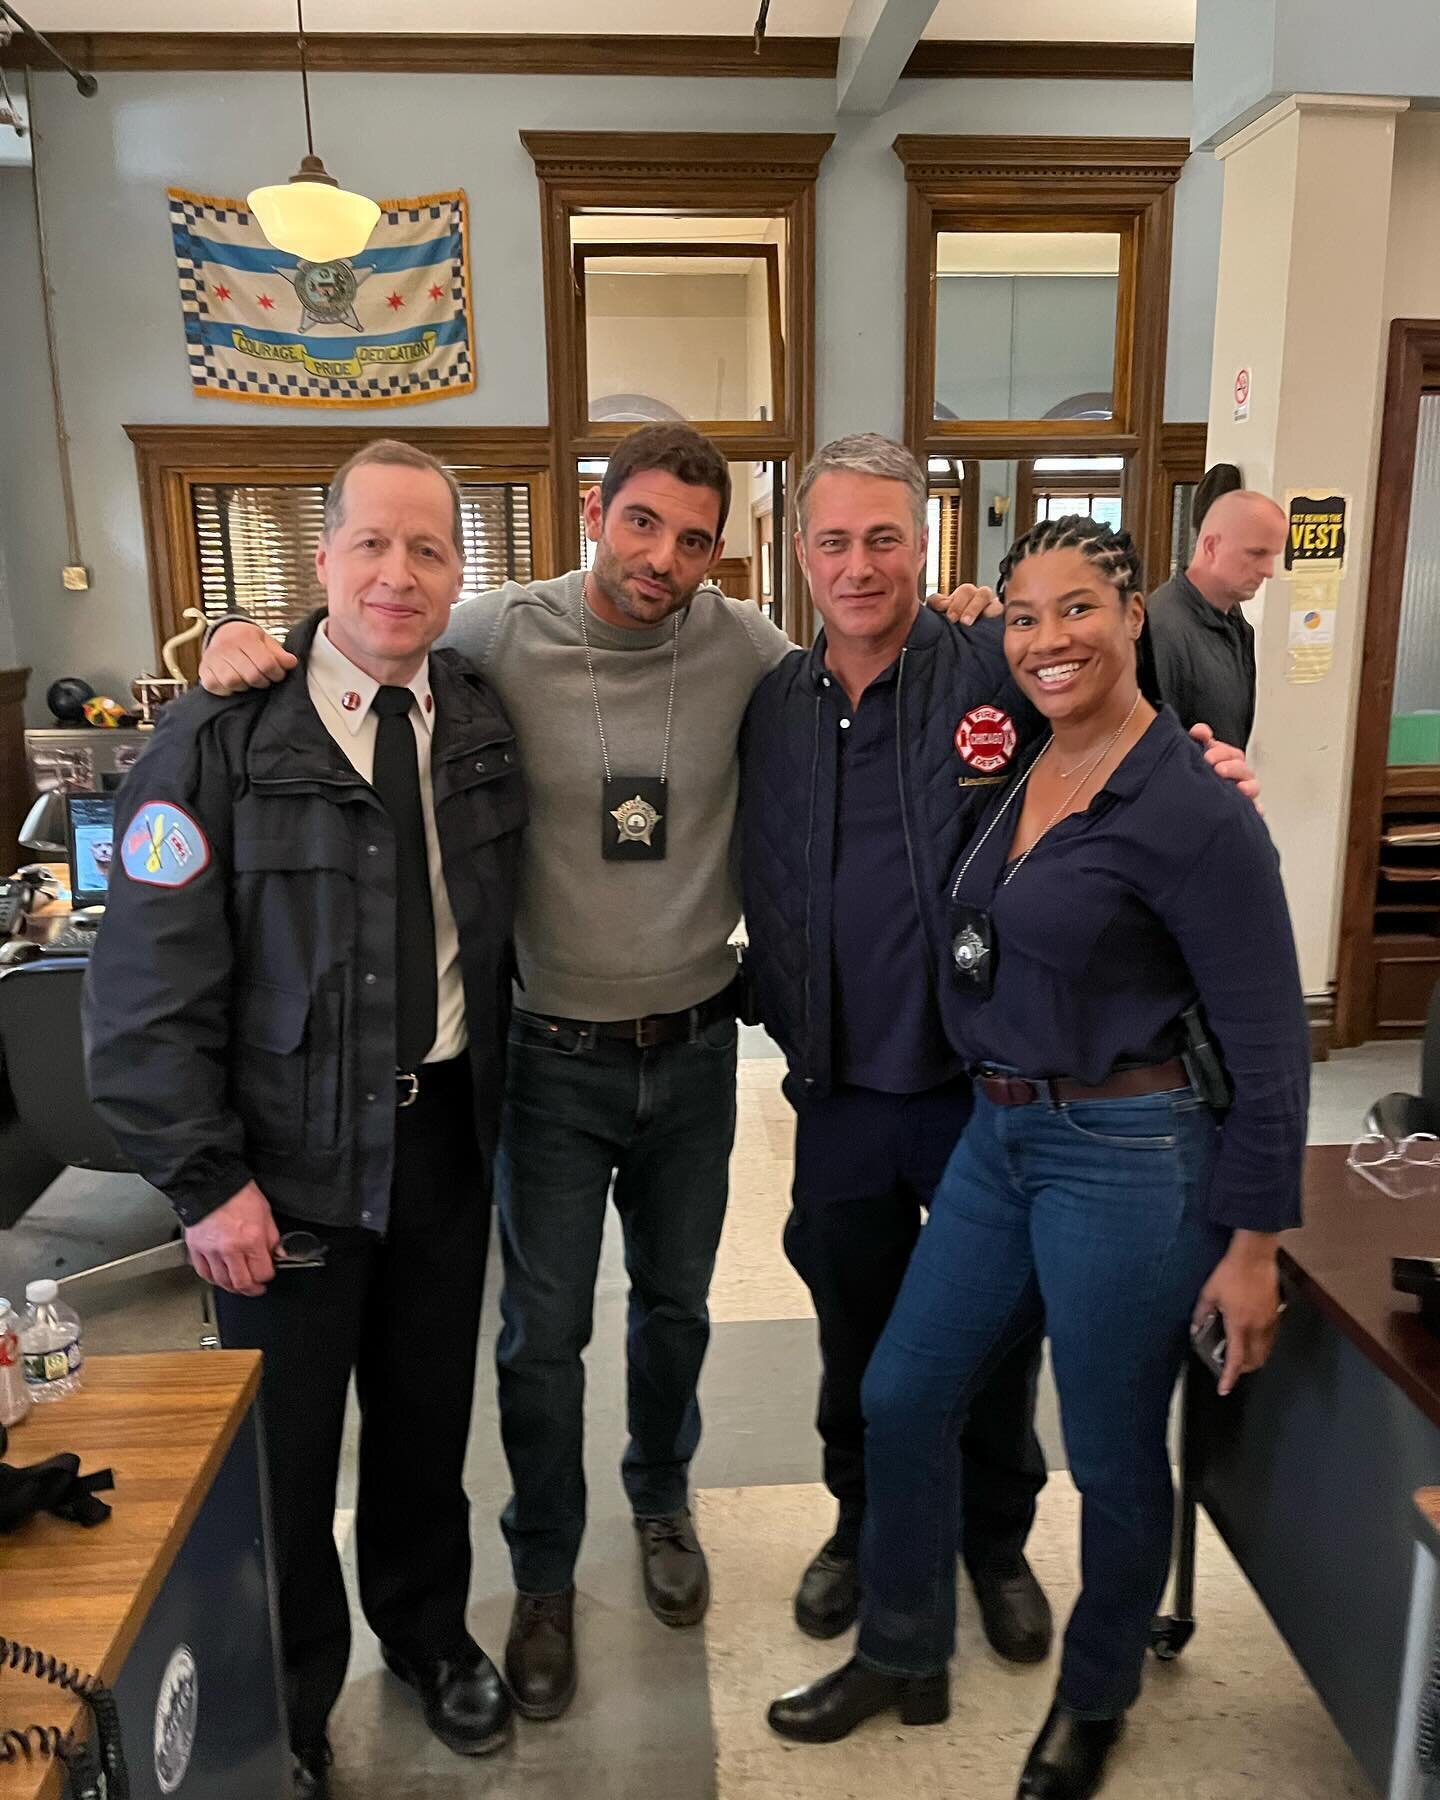 An episodic TV booking, but MAKE IT HOT.🔥

Life is but a dream when you get to spend days playing on a @wolfentertainment @nbconechicago show.

And the play becomes a magical masterclass when you get to spend those days alongside smooth pros like @h